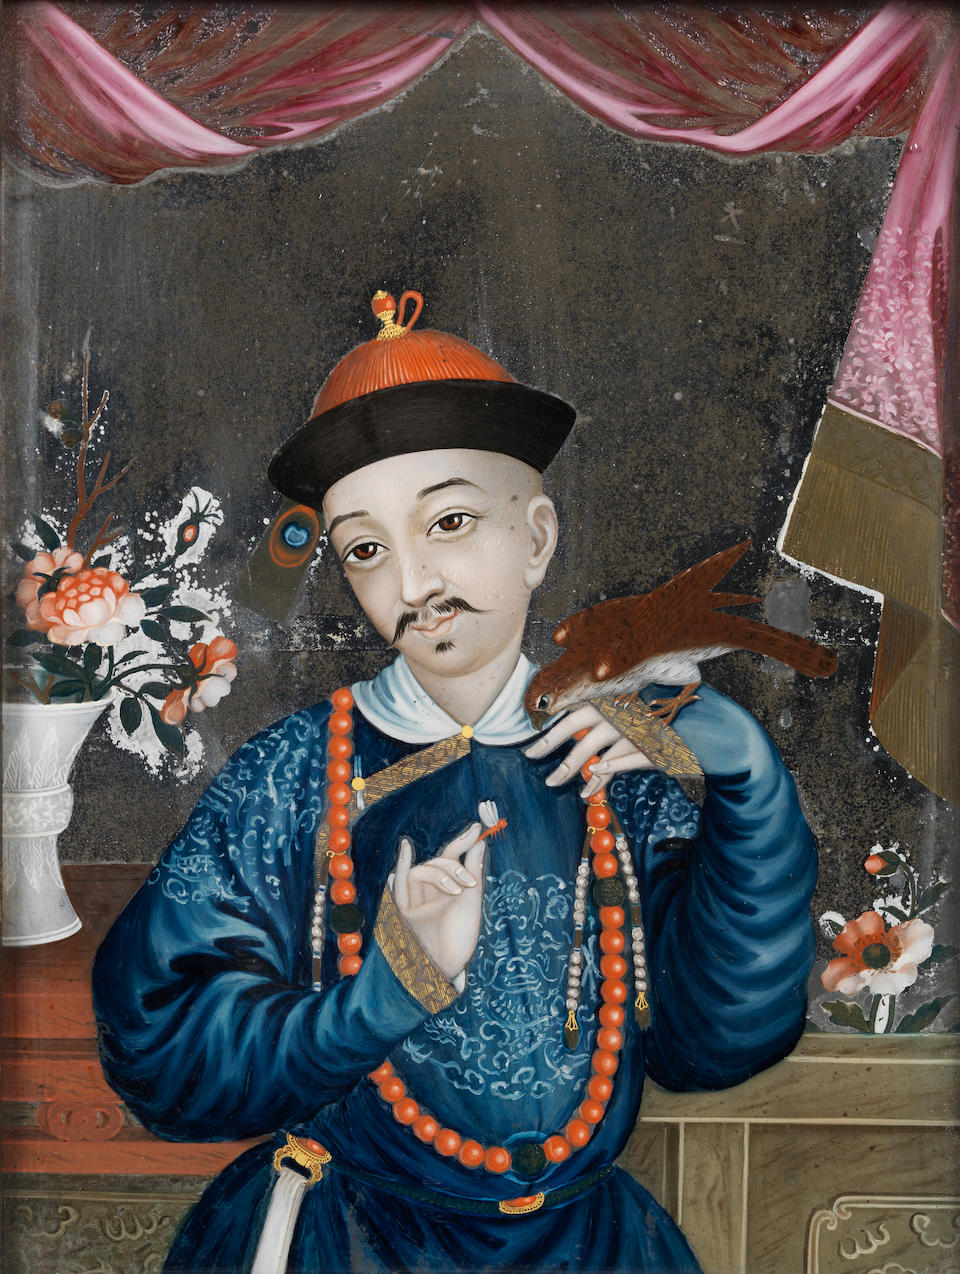 Bonhams Chinese School 18th Century Manchu Courtier And His Consort